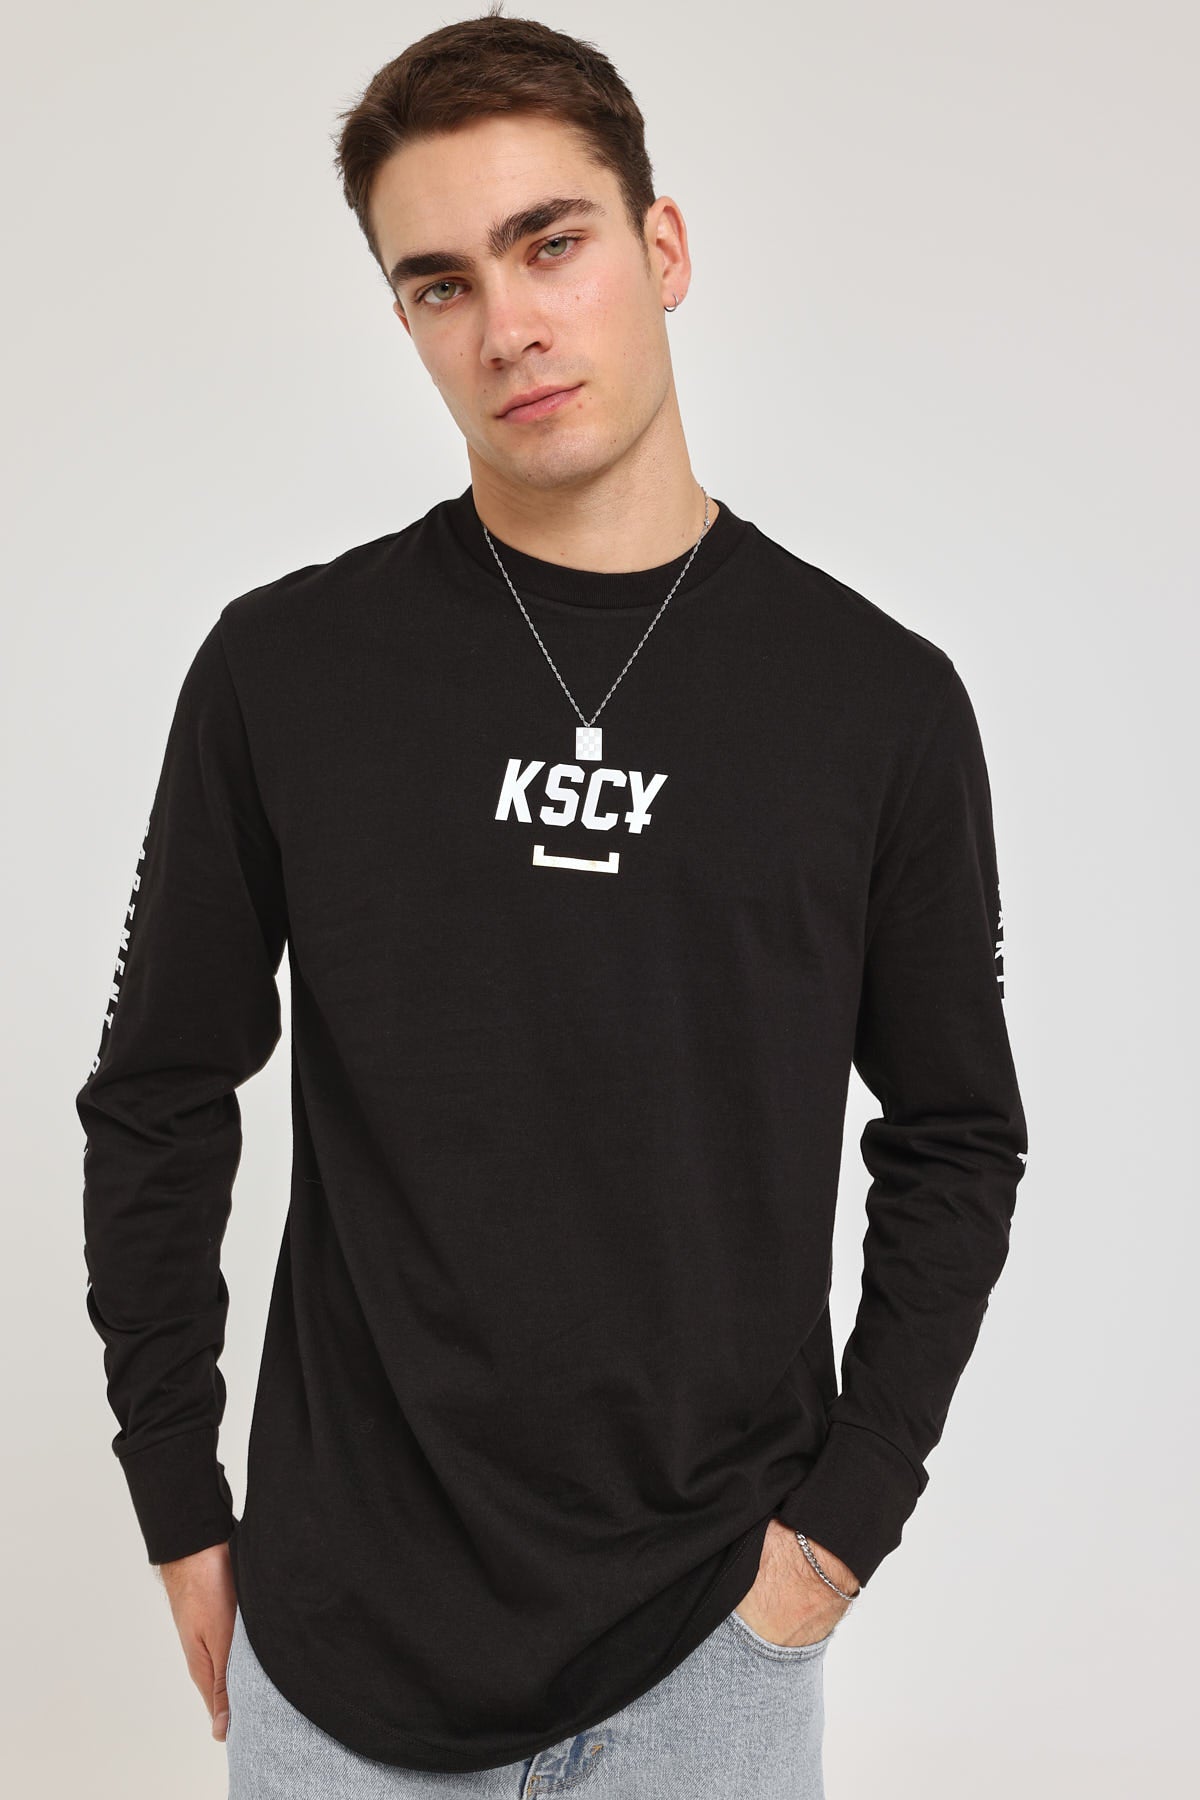 Kiss Chacey Tocayo Dual Curved Long Sleeve Tee Jet Black